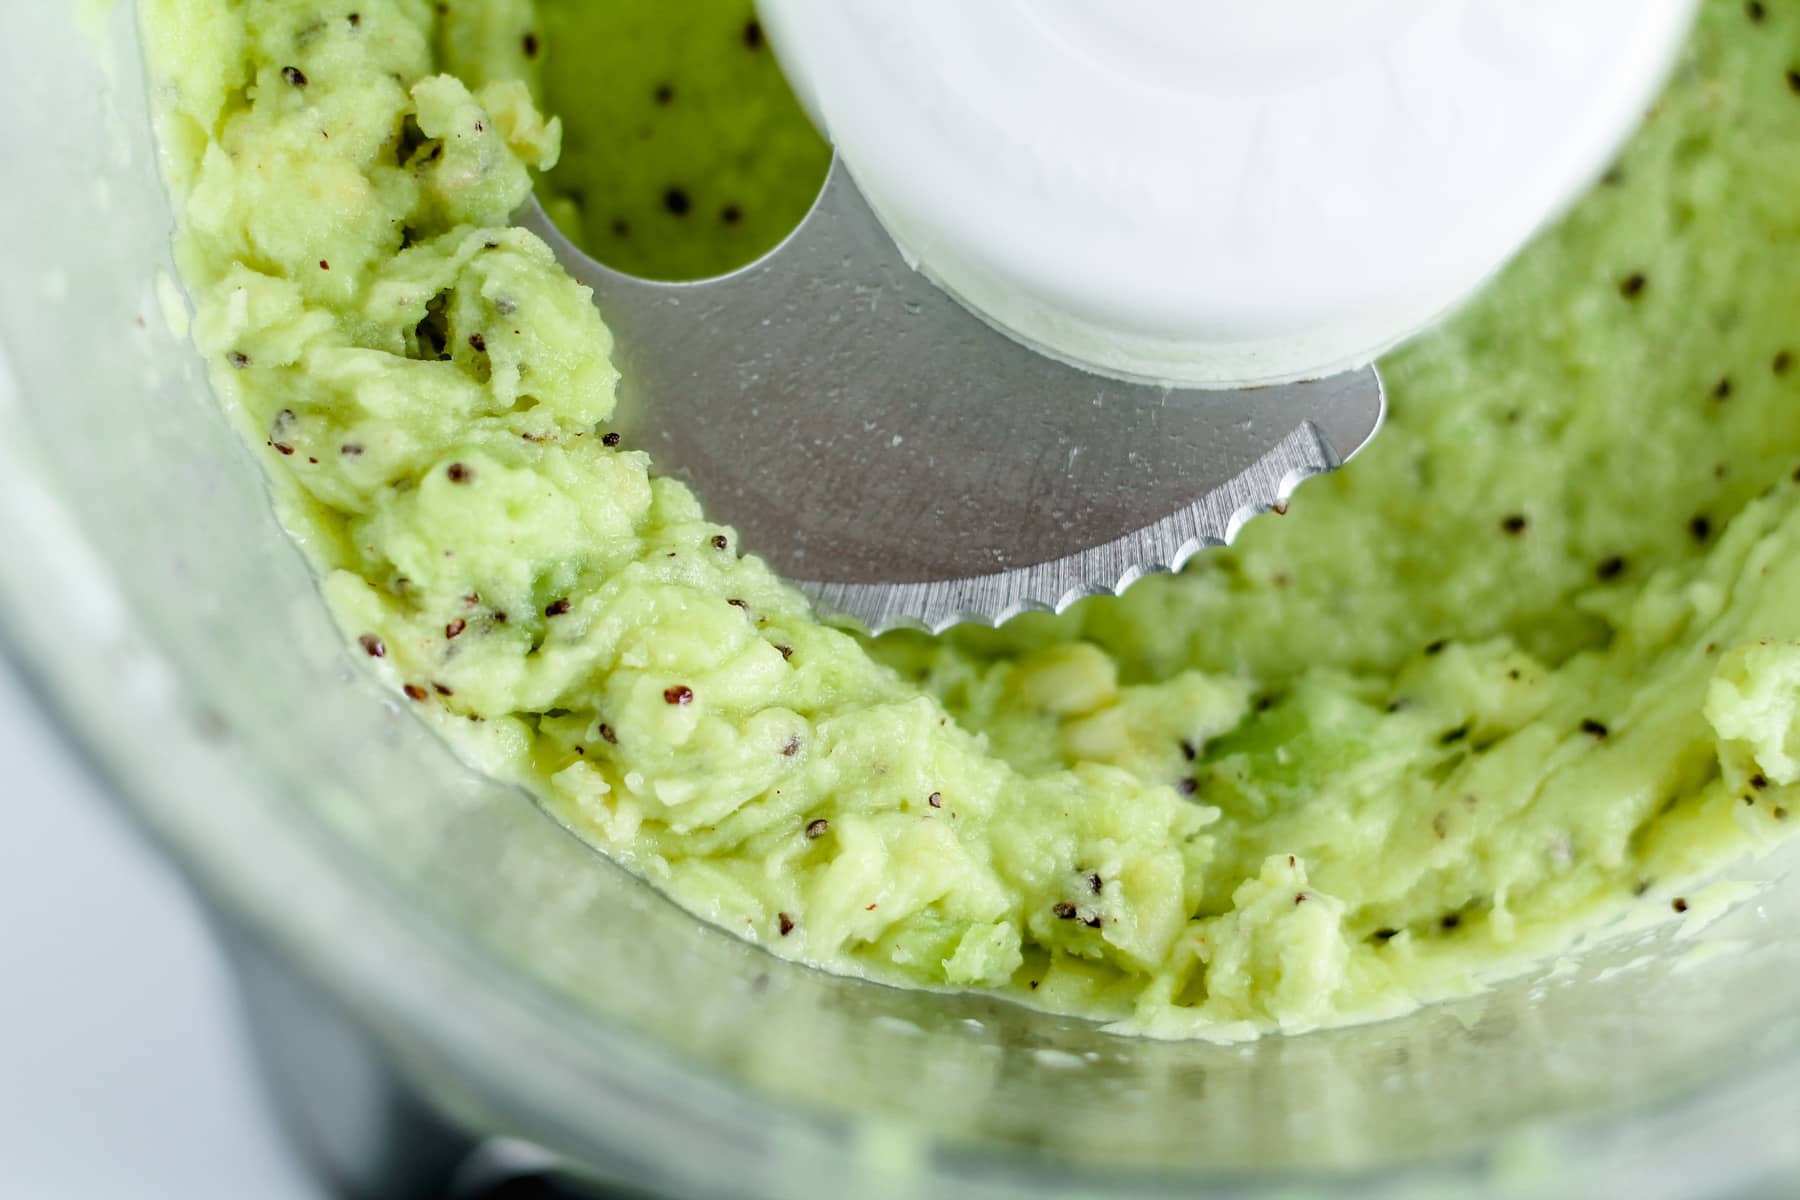 frozen kiwi chunks being blended in a food processor.